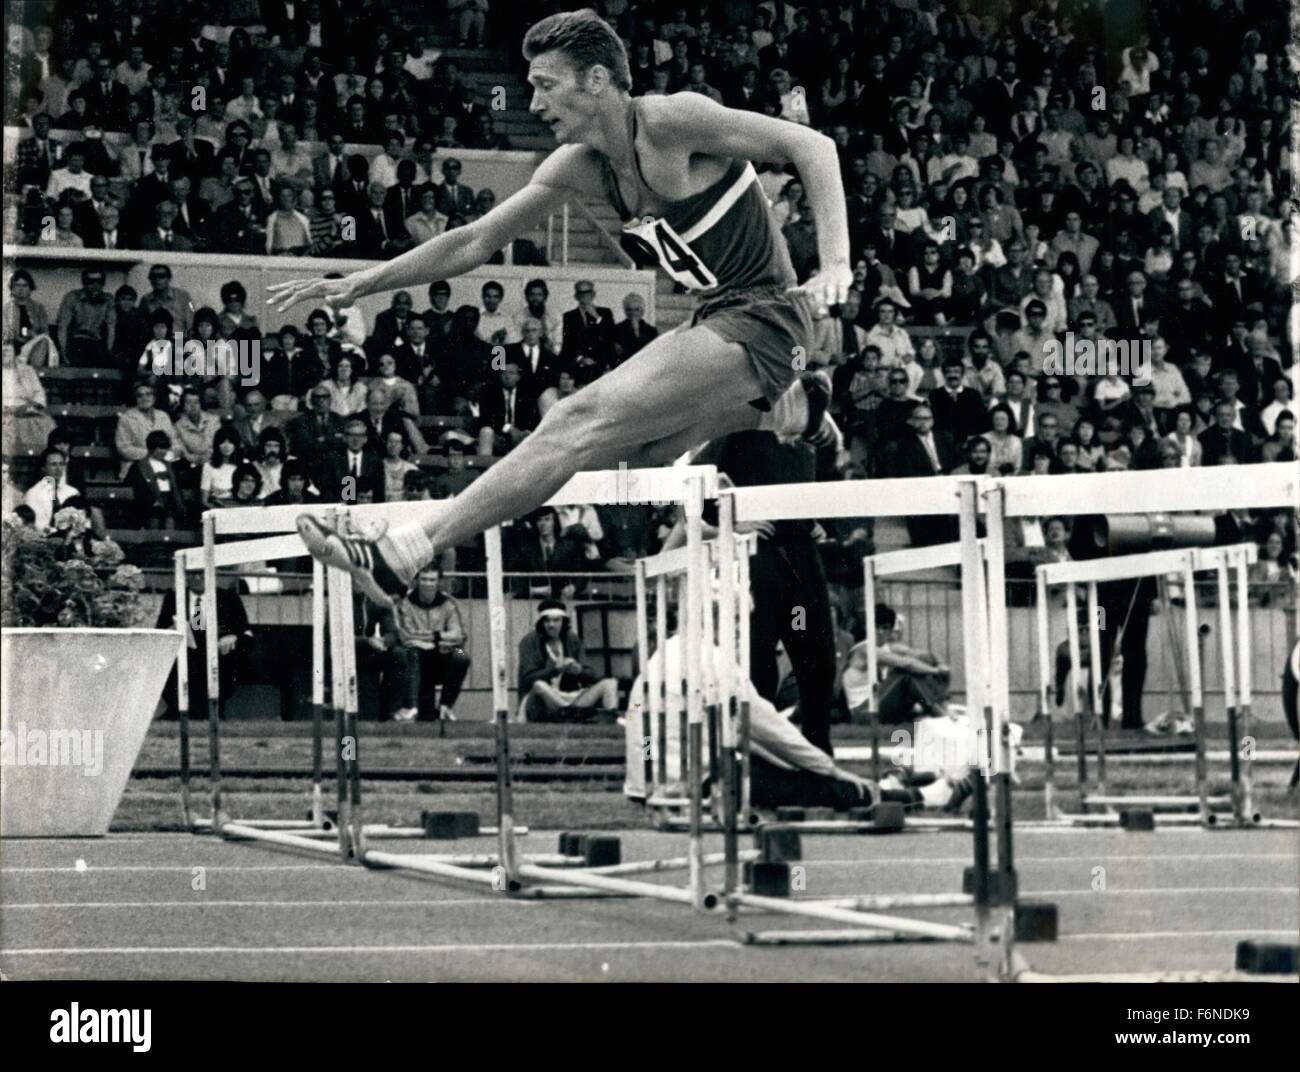 July 24, 1971 - Victory for Sherwood London: John Sherwood of Birchfield Harriers flies over the hurdles on his way to victory in the 400 metres hurdles event at the A.A.A. Championships this afternoon. SherwoodÃ¢â‚¬â„¢s time in the event was 51, 6. seconds. The championships were staged at the Crystal Palace National Sports Centre in South London. 24th July 1971 © Keystone Pictures USA/ZUMAPRESS.com/Alamy Live News Stock Photo